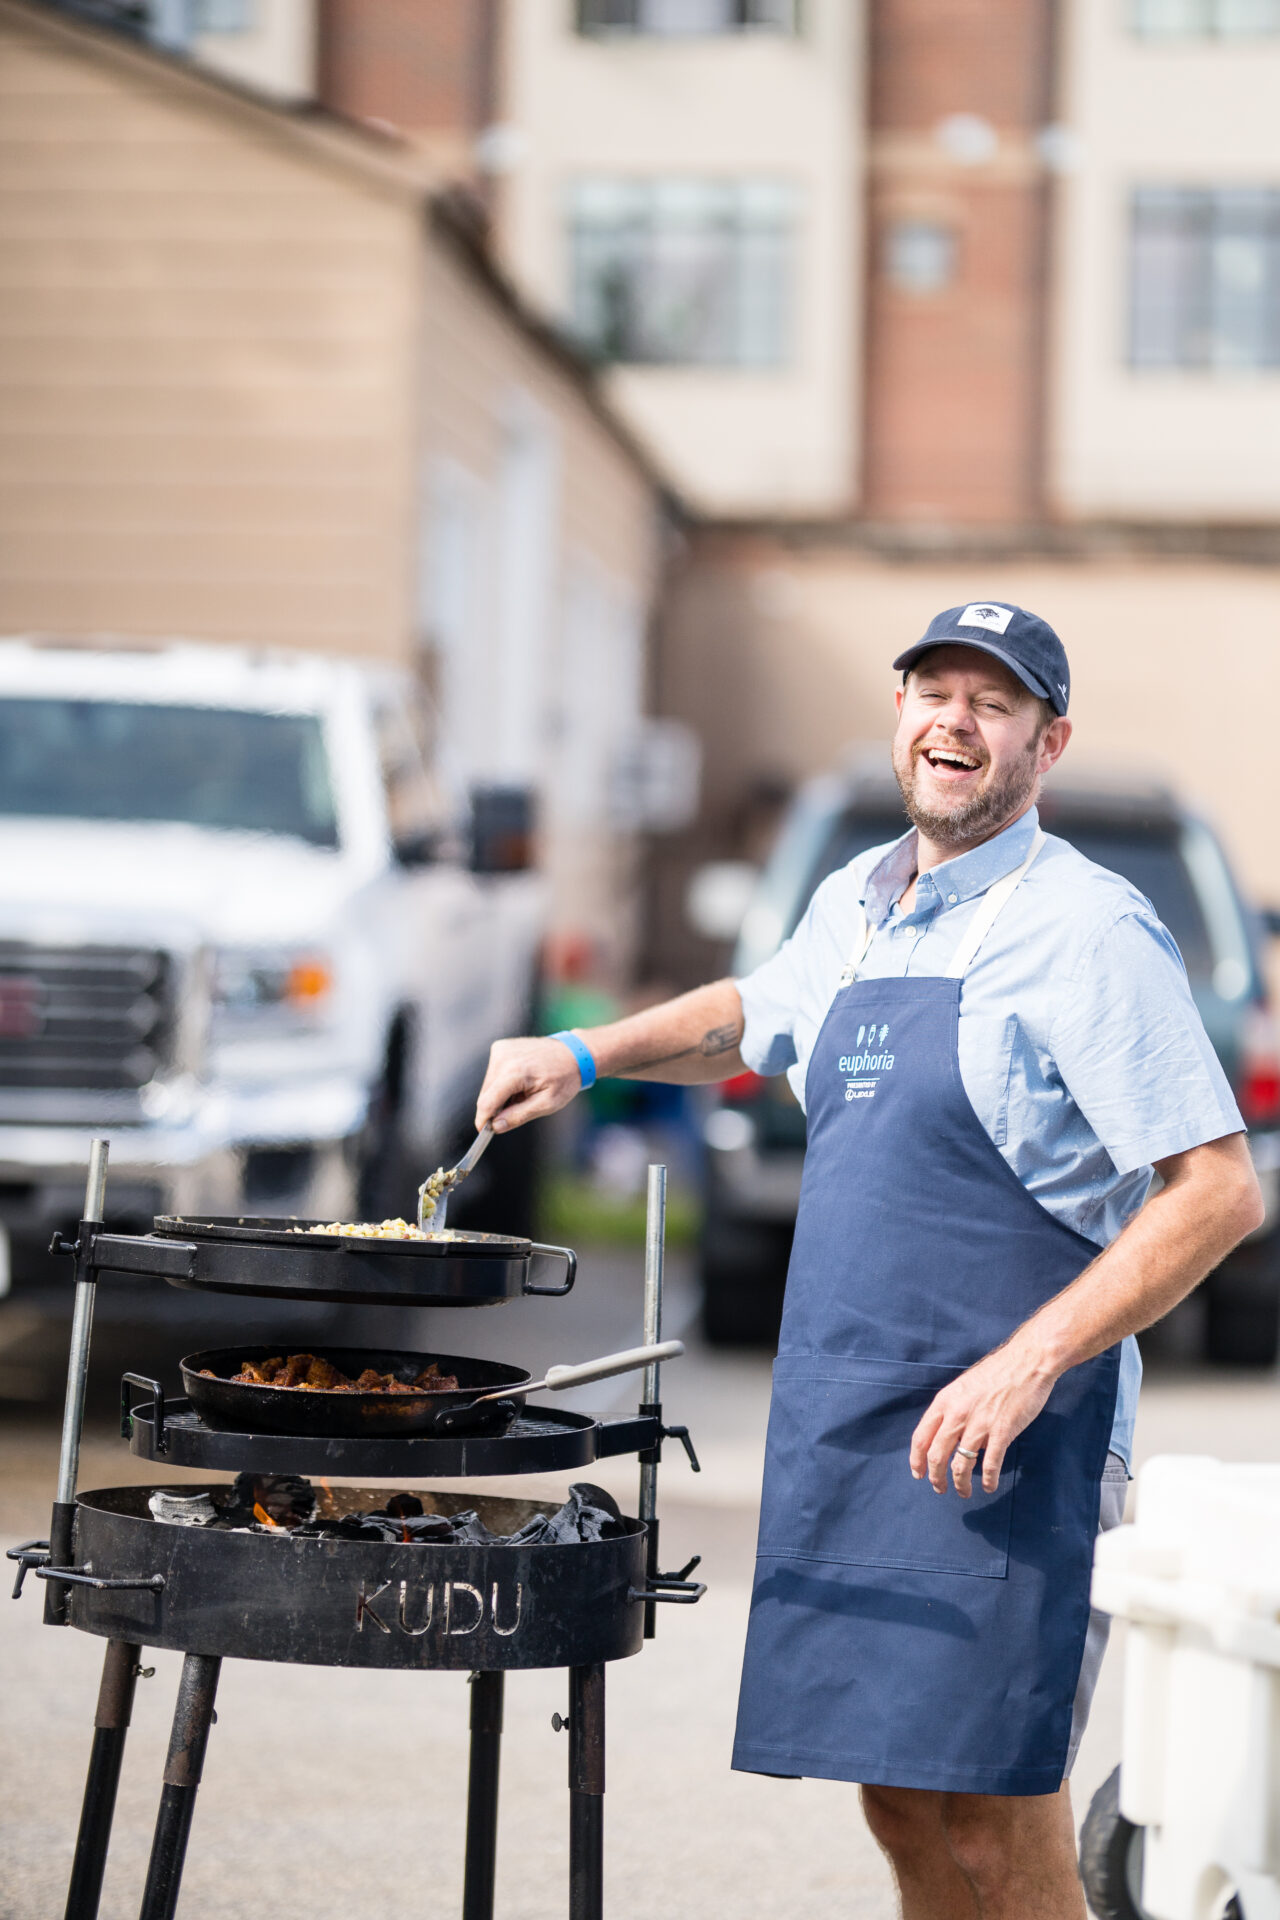 A man in a blue apron stands laughing while he grills.